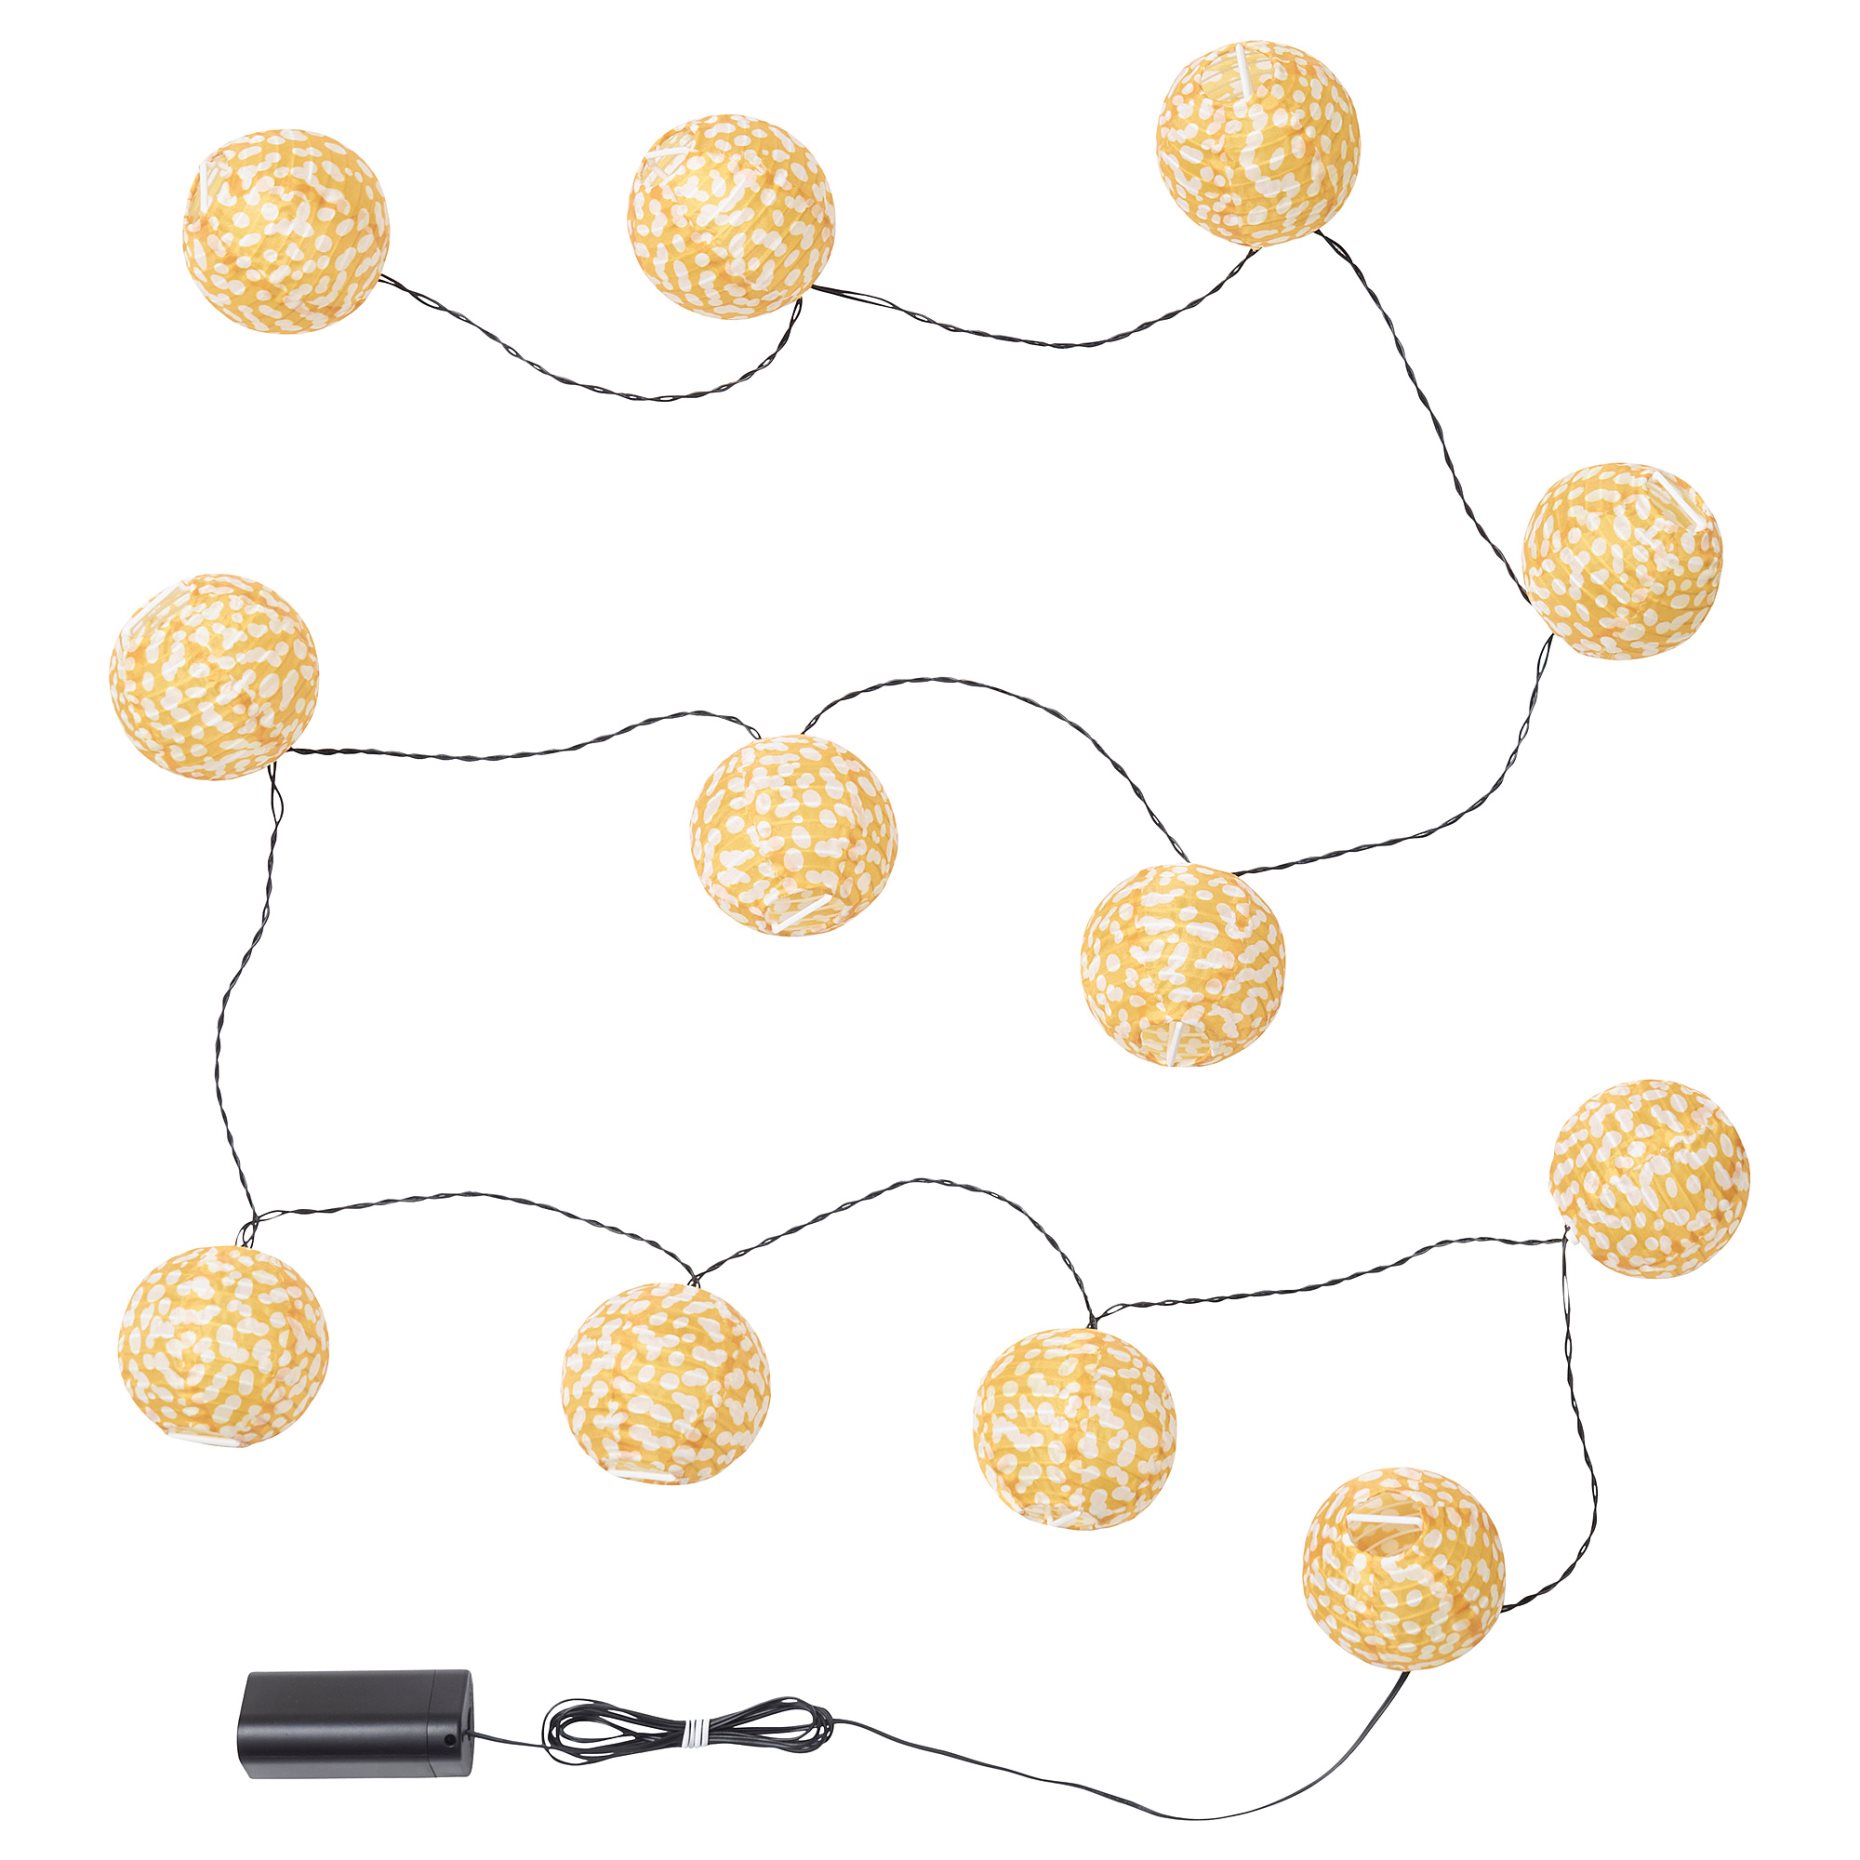 SOMMARLÅNKE, lighting chain with built-in LED light source/12 bulbs/outdoor/battery-operated/dots, 205.446.23